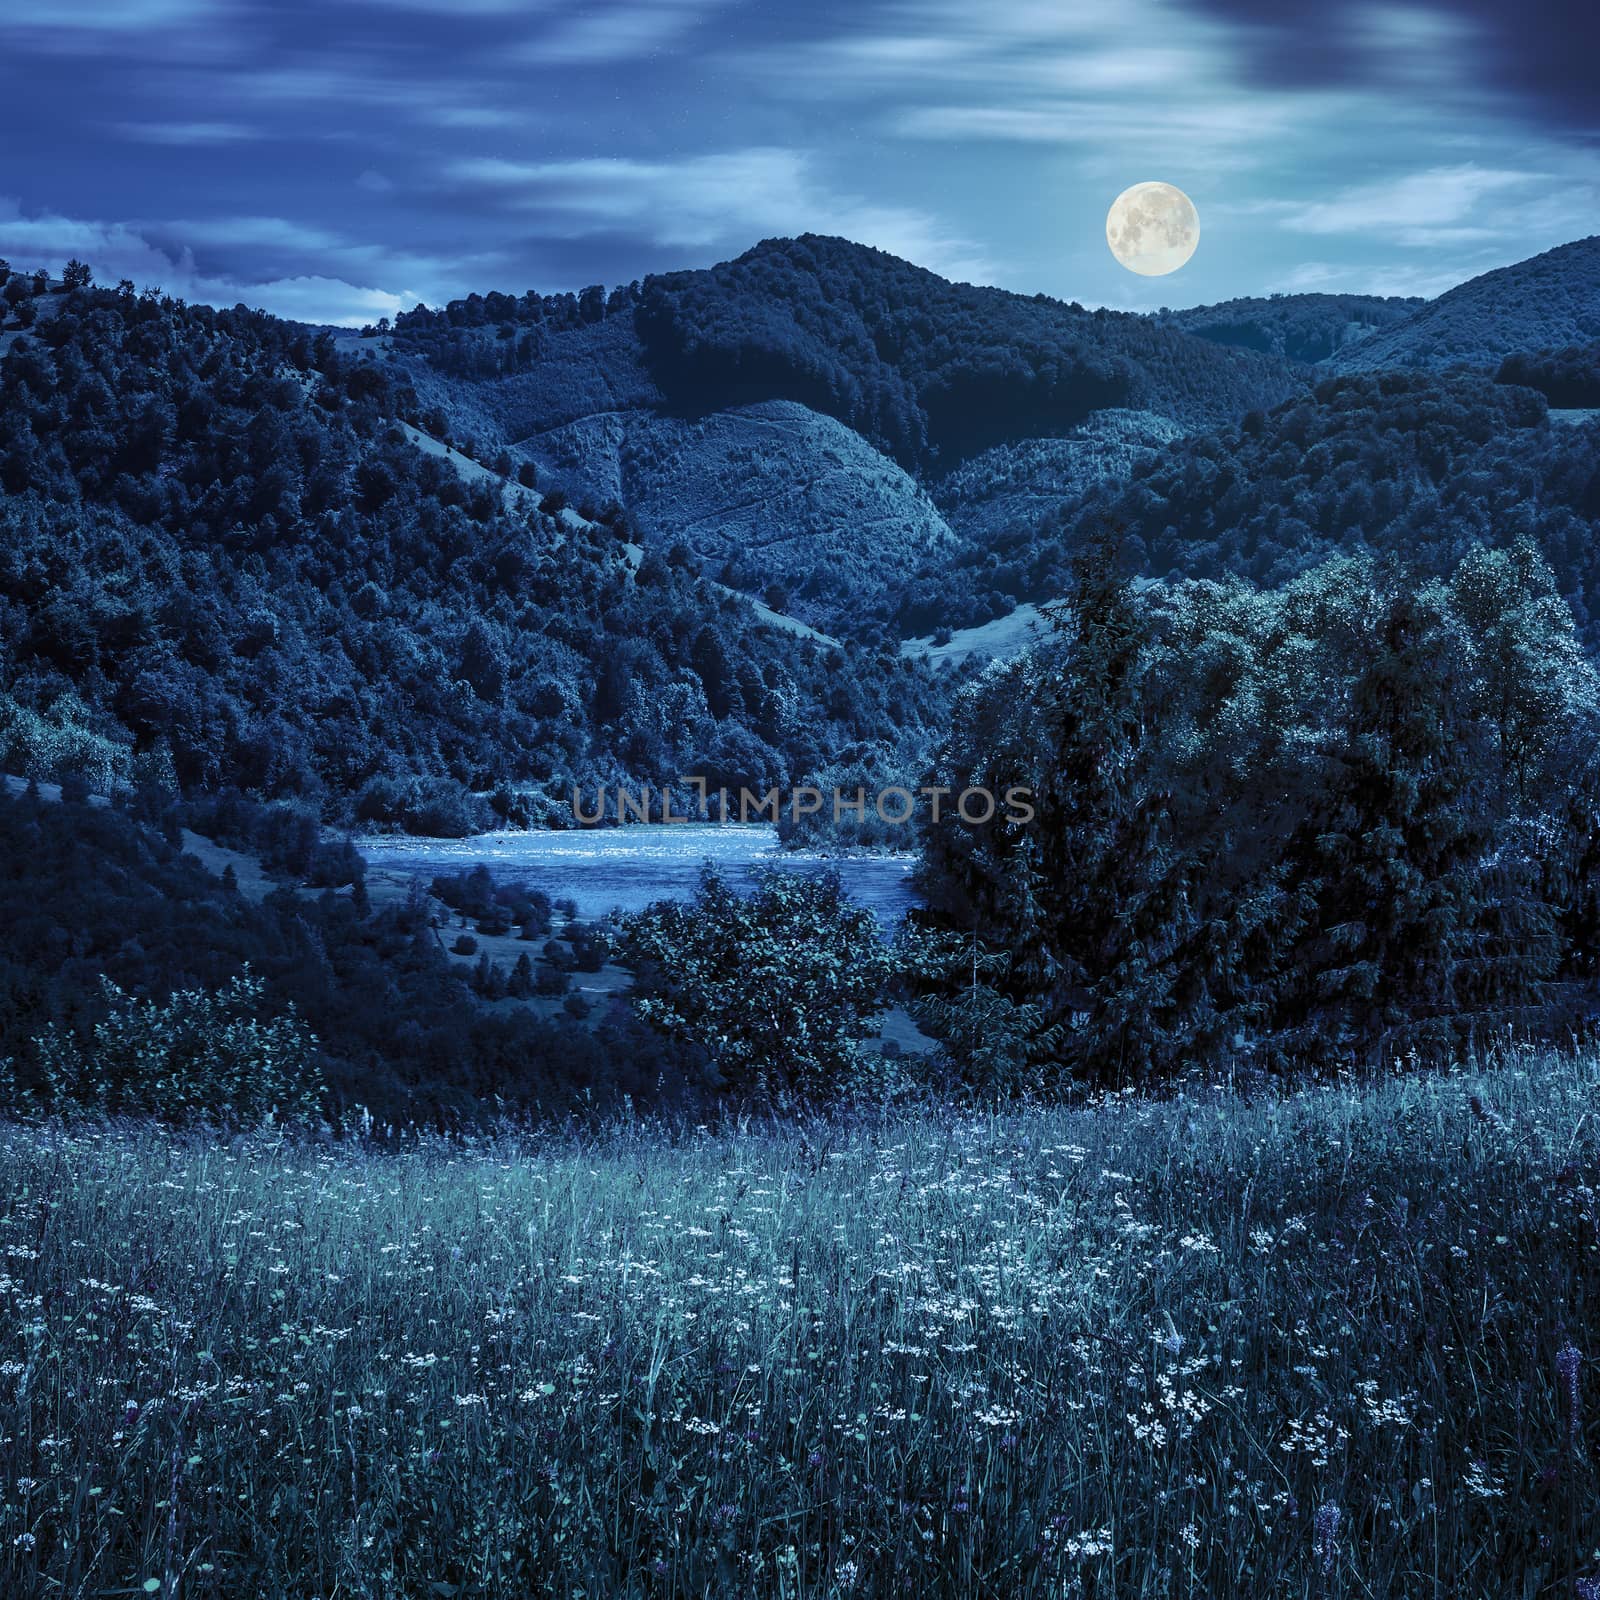 pine trees near meadow in mountains at night by Pellinni